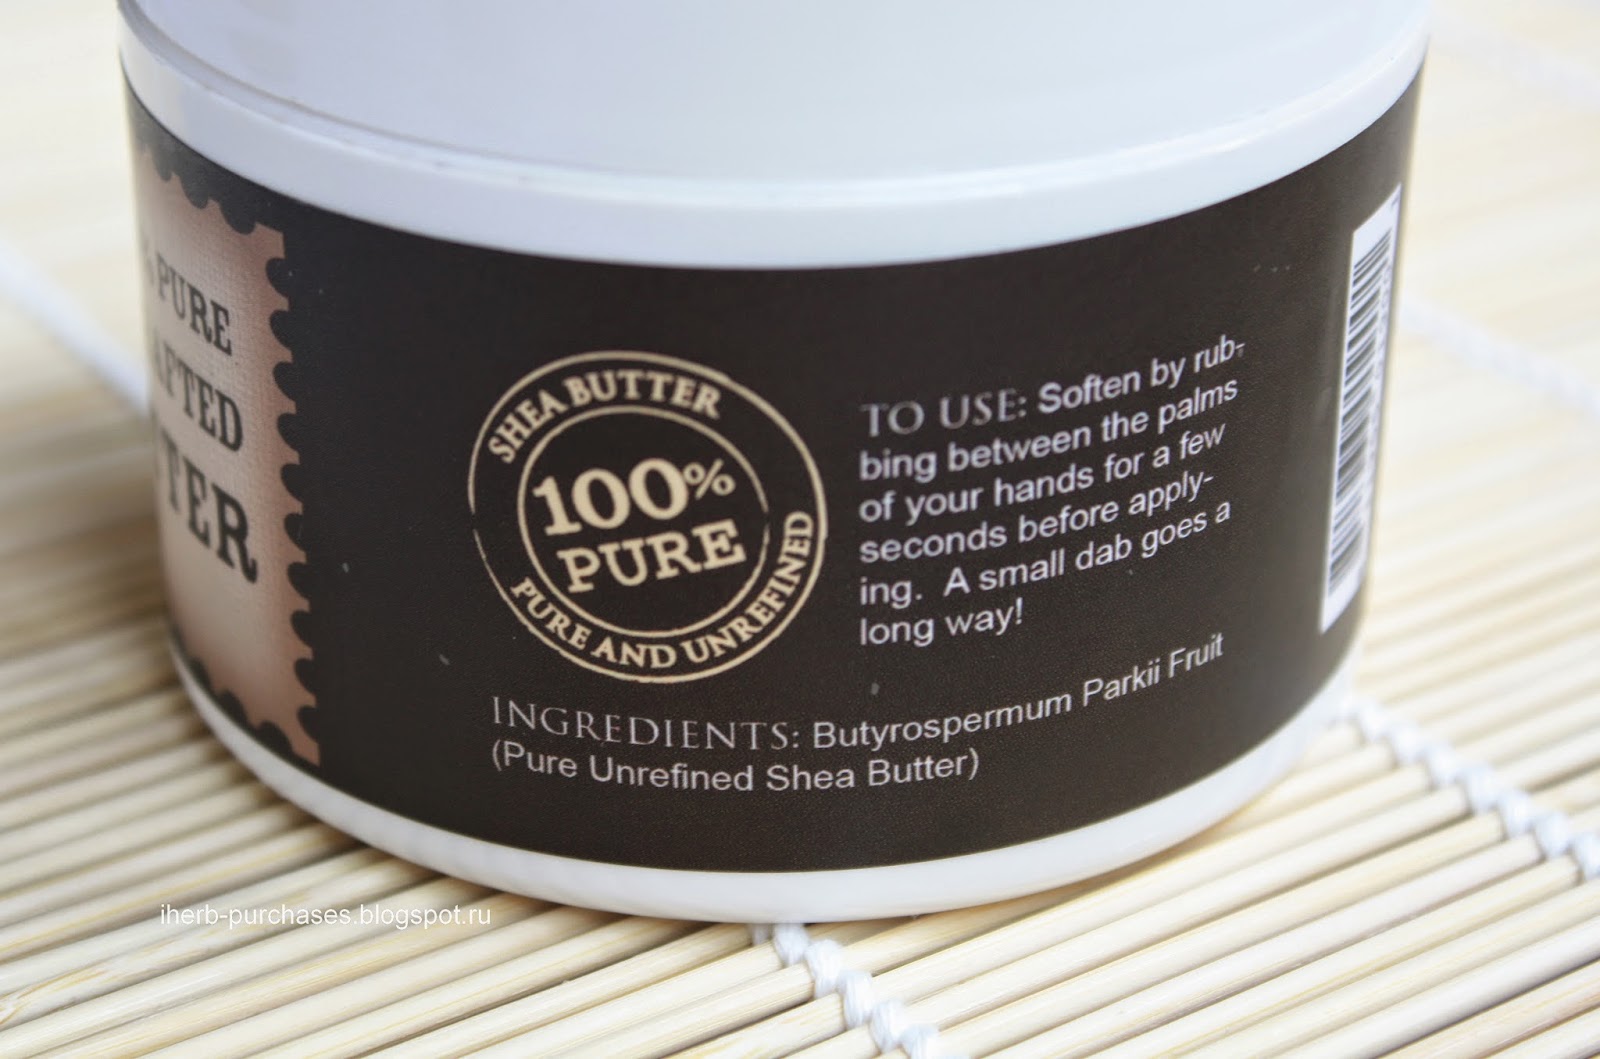 Out of Africa, 100% Pure and Unrefined Shea Butter, Raw and Wild Crafted, 8 oz (227 g)